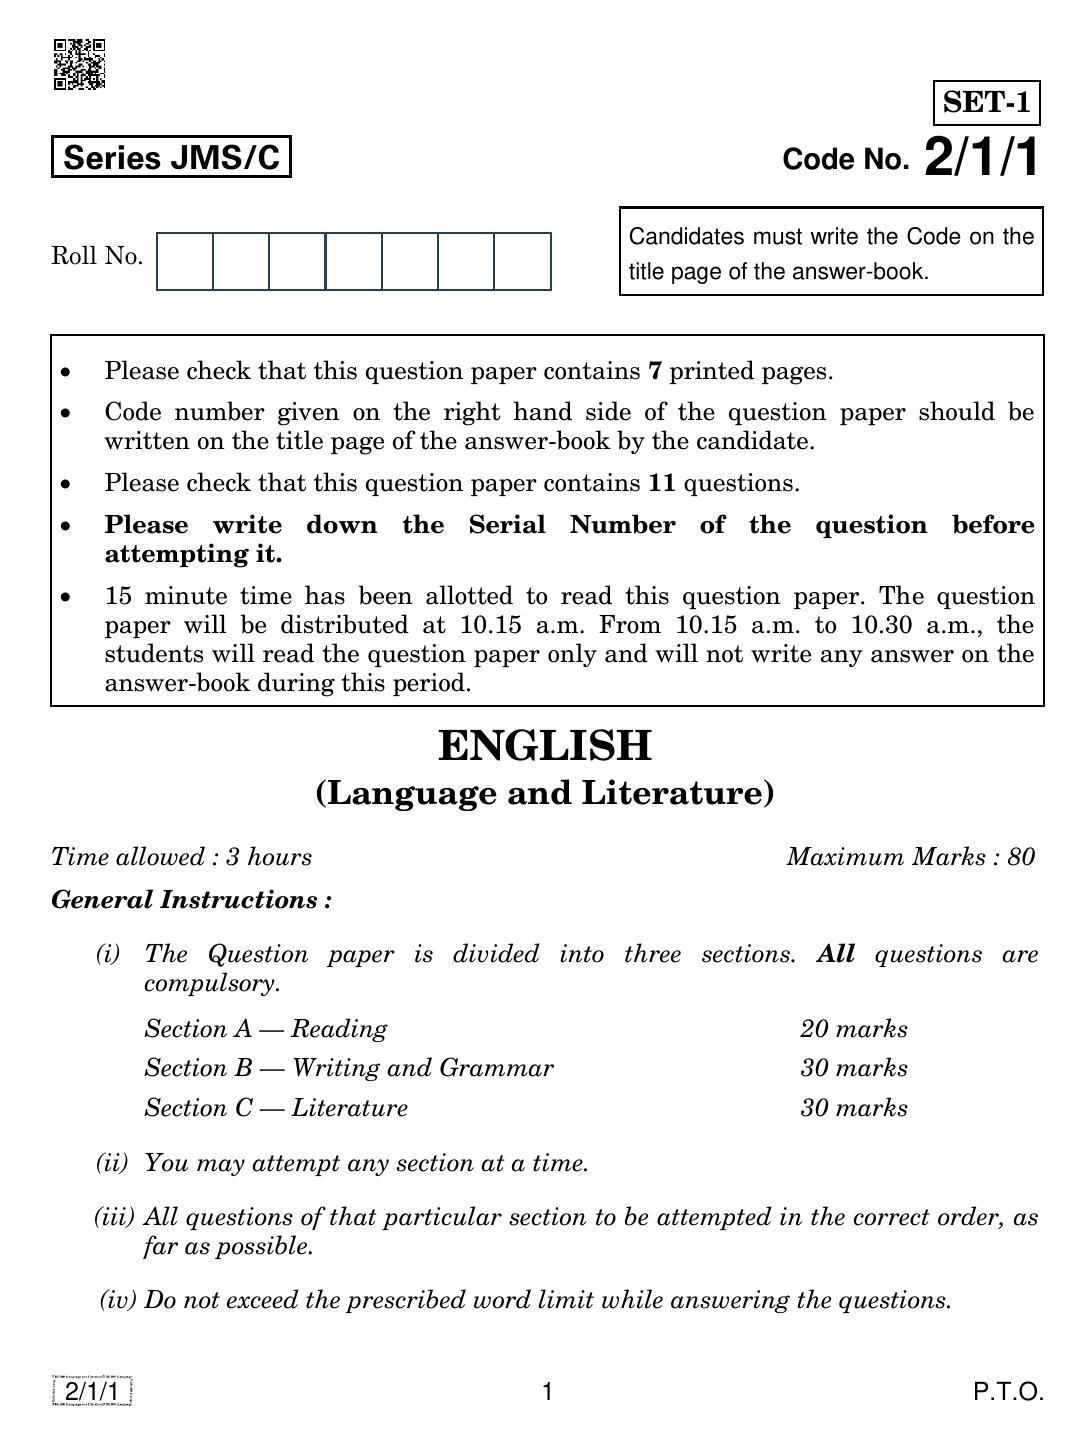 CBSE Class 10 2-1-1 ENGLISH LANG. & LIT. 2019 Compartment Question Paper - Page 1